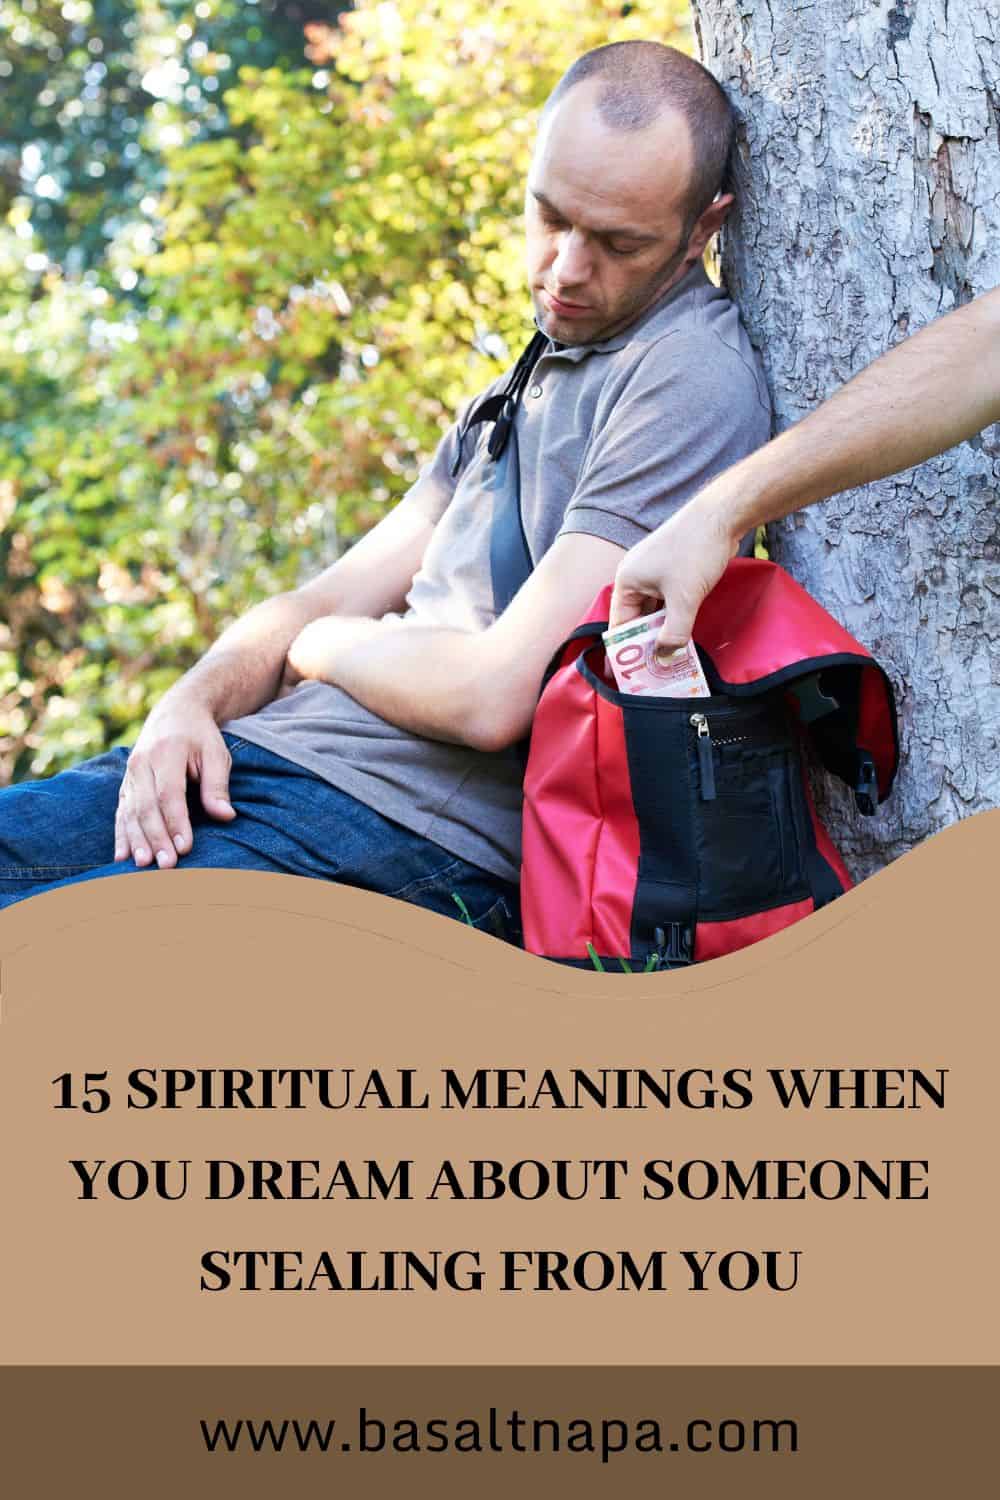 15 Spiritual Meanings When You Dream About Someone Stealing From You